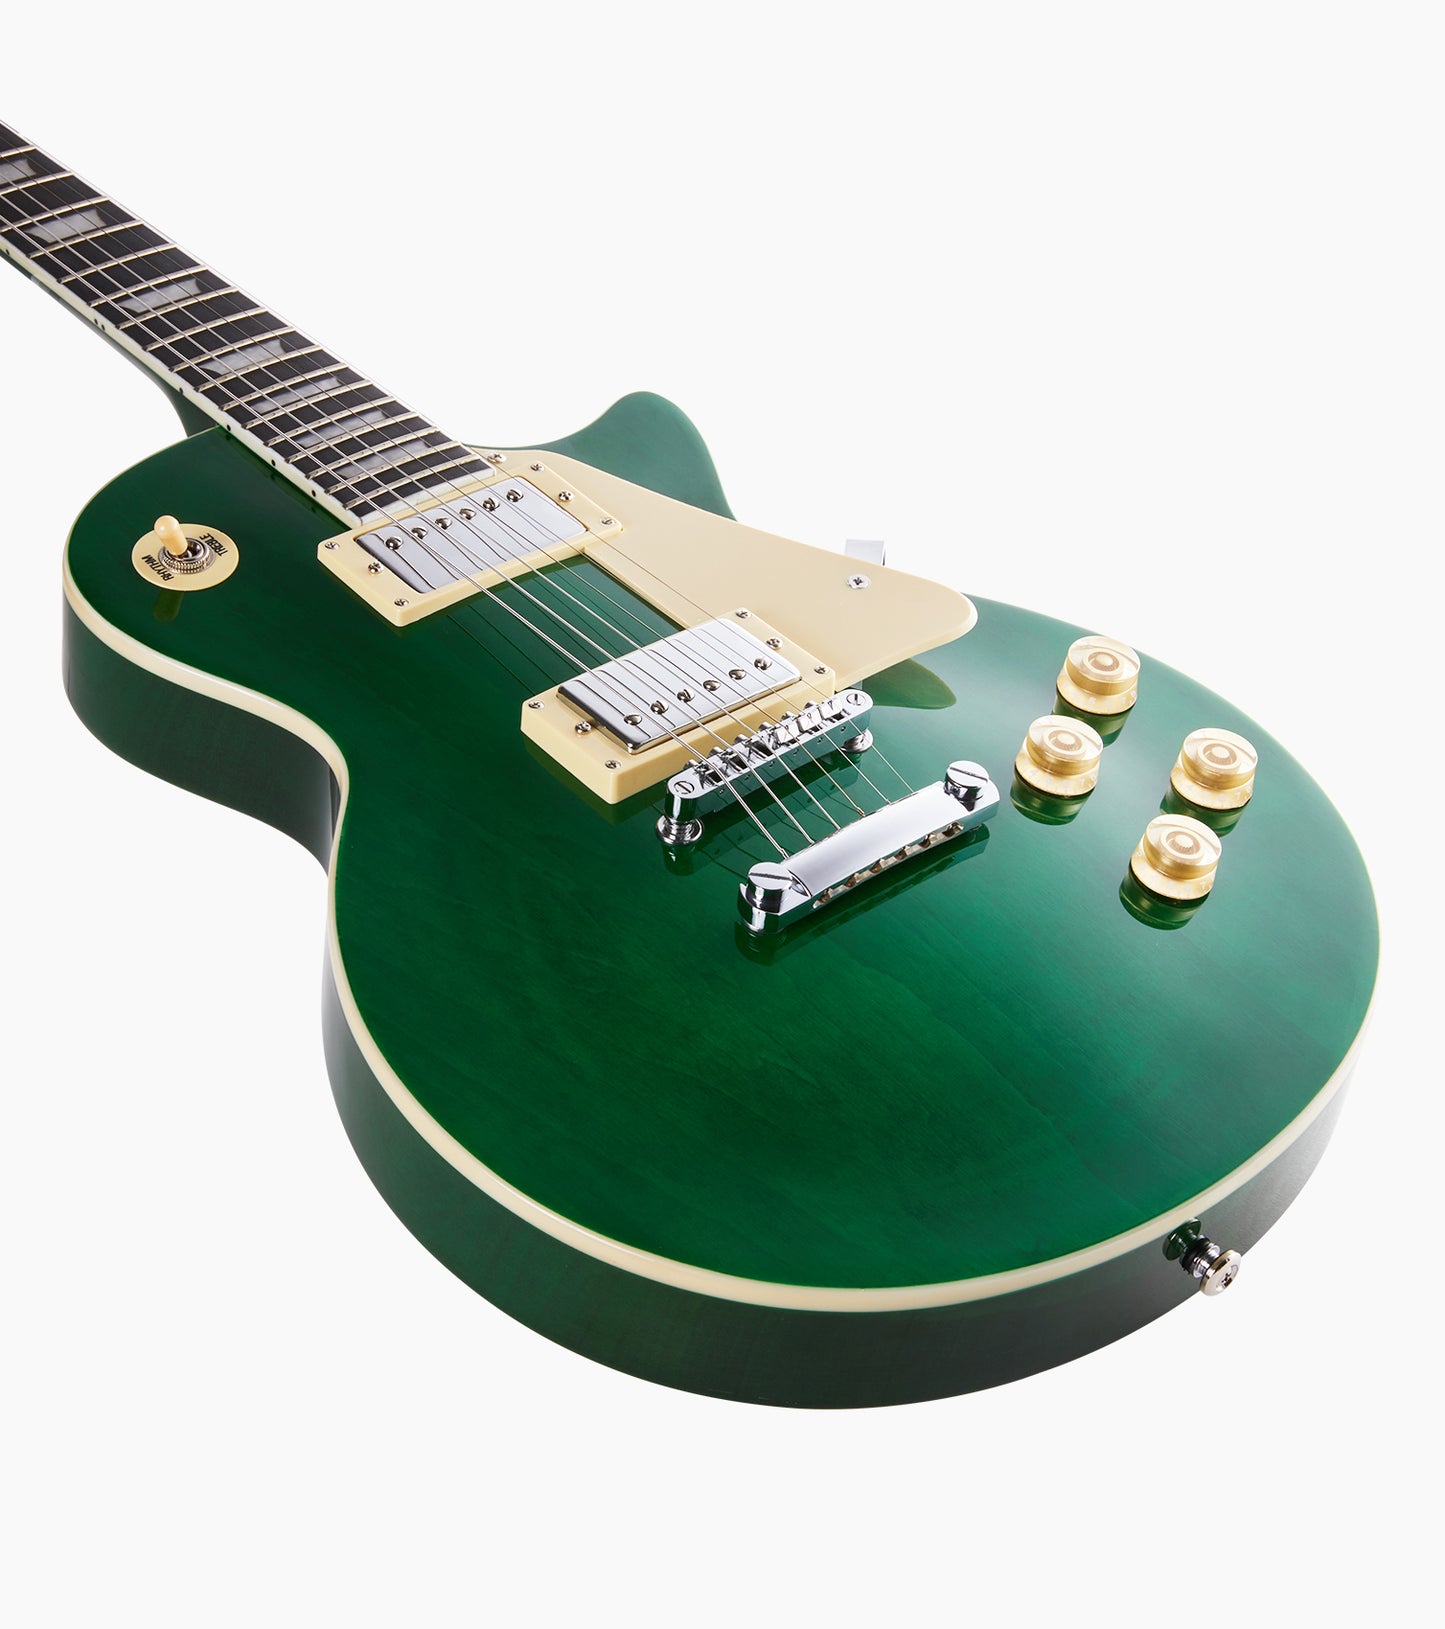 39 inch Les Paul Electric Guitar in Green - Front